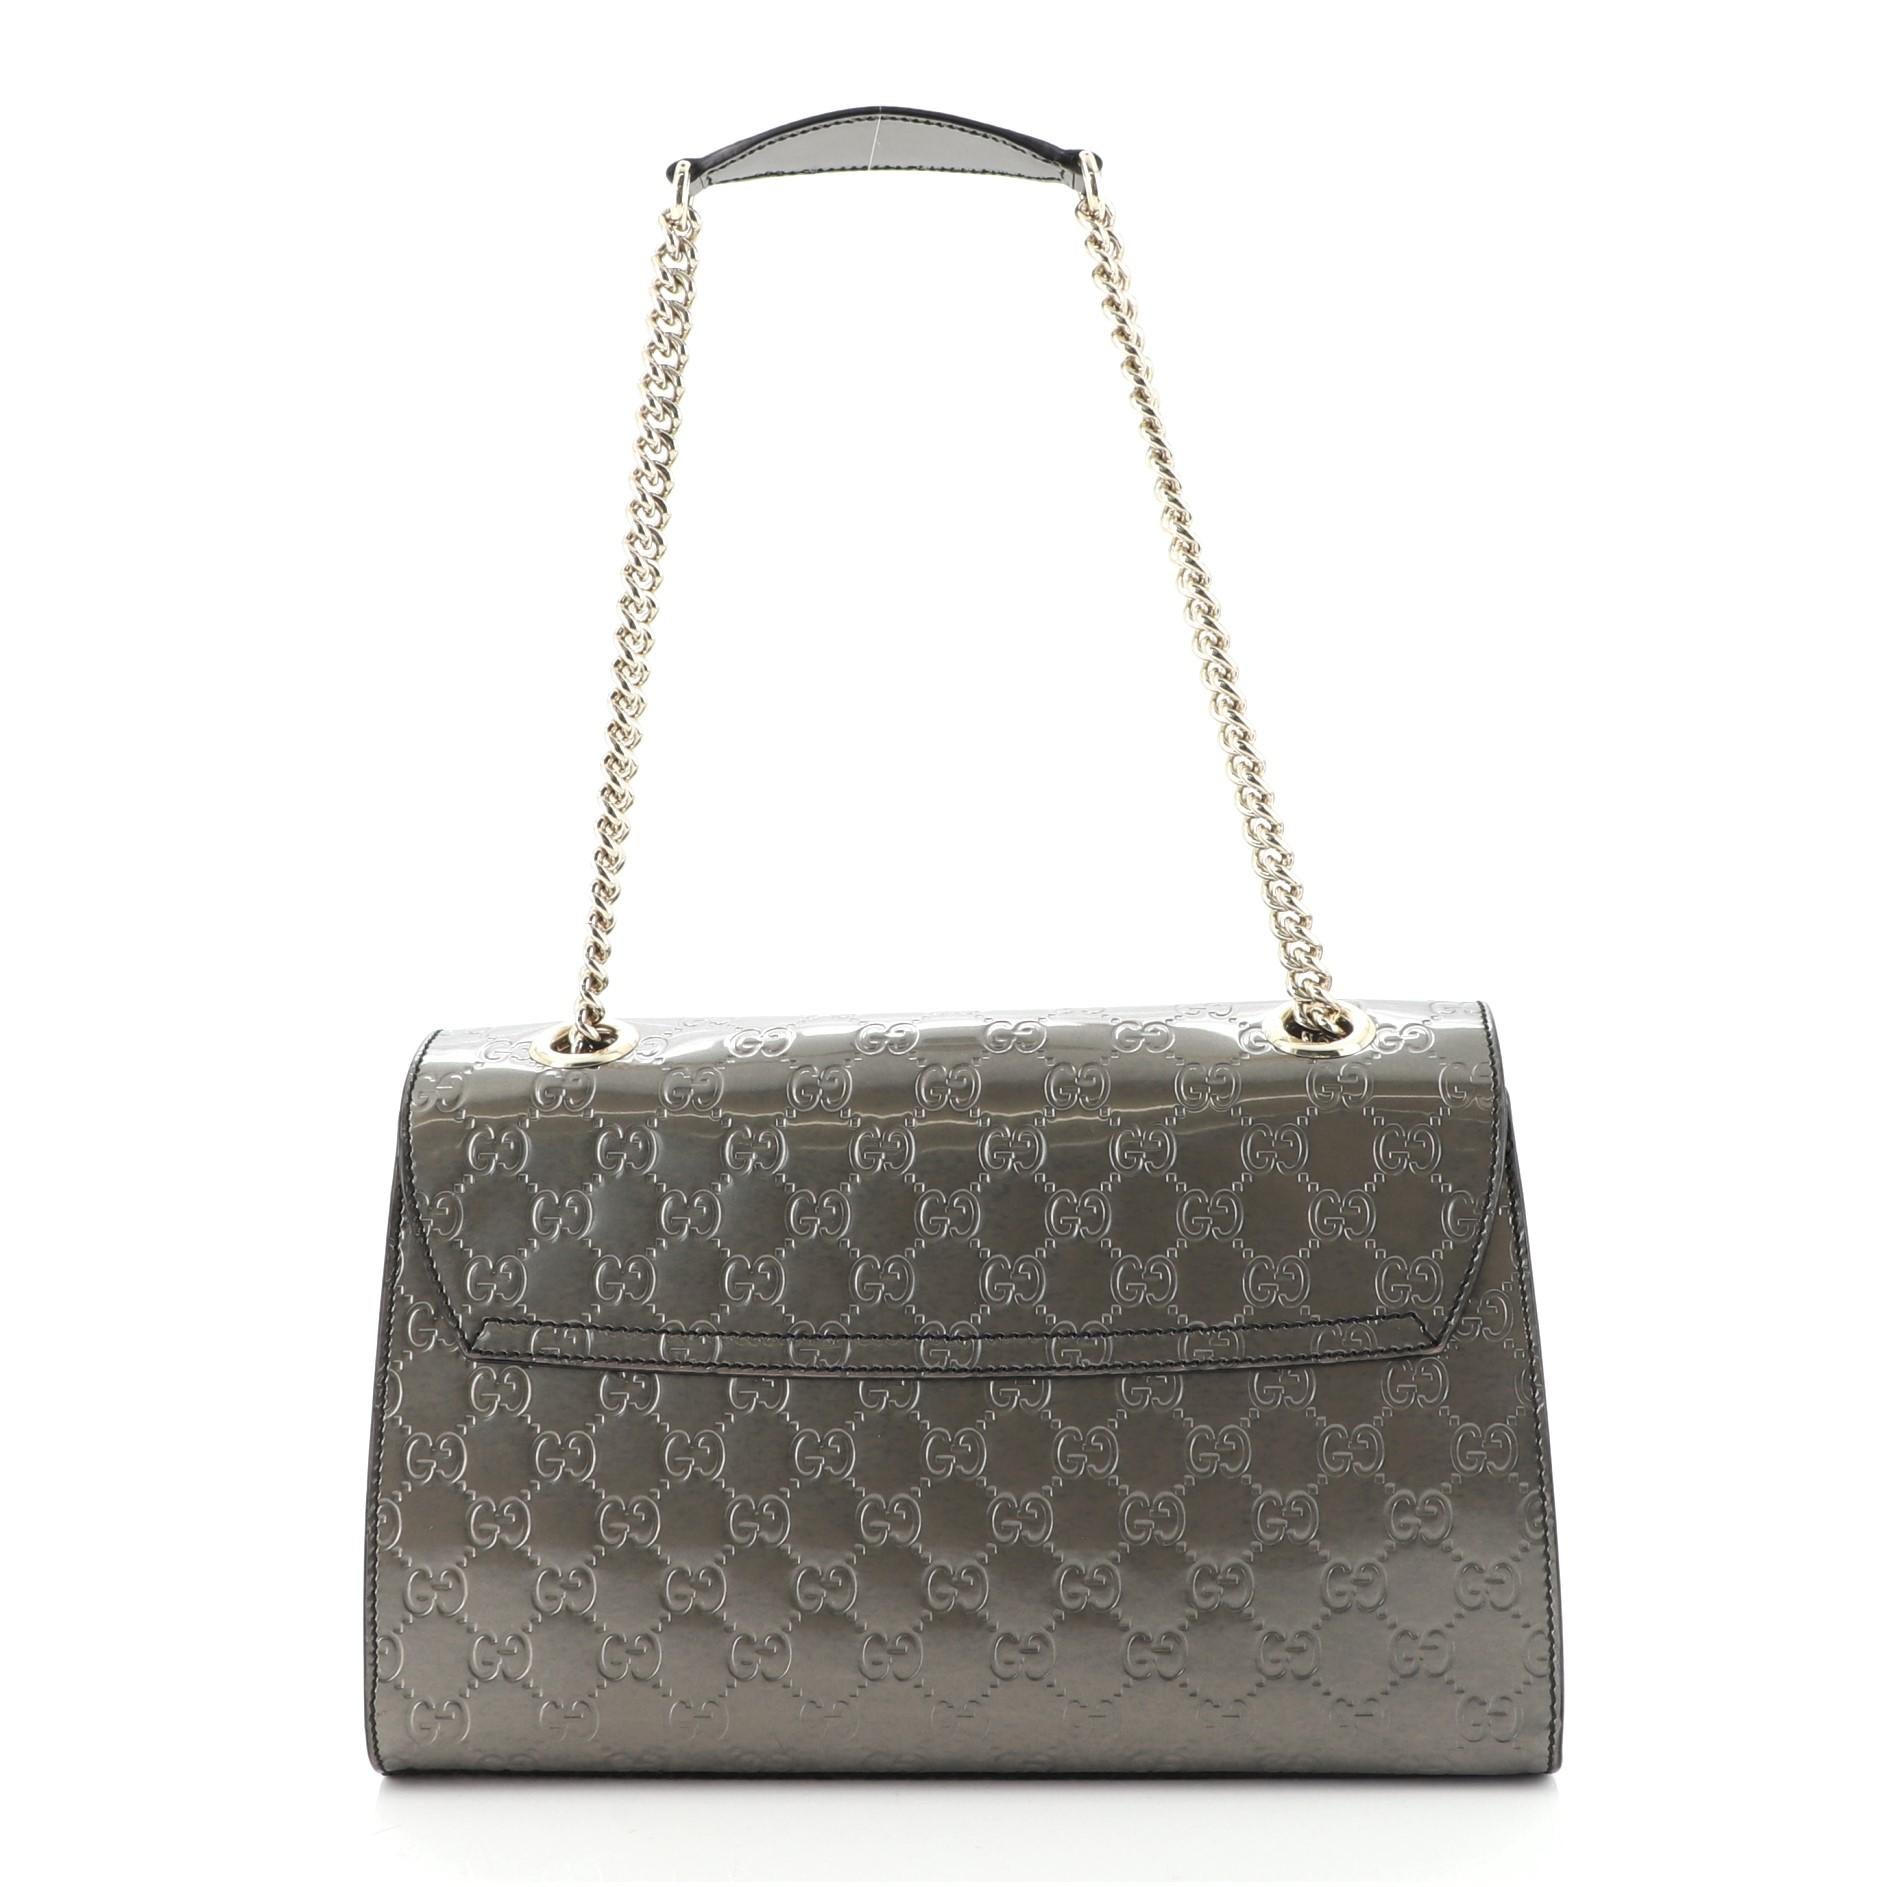 Gray Gucci Emily Chain Flap Shoulder Bag Guccissima Patent Large